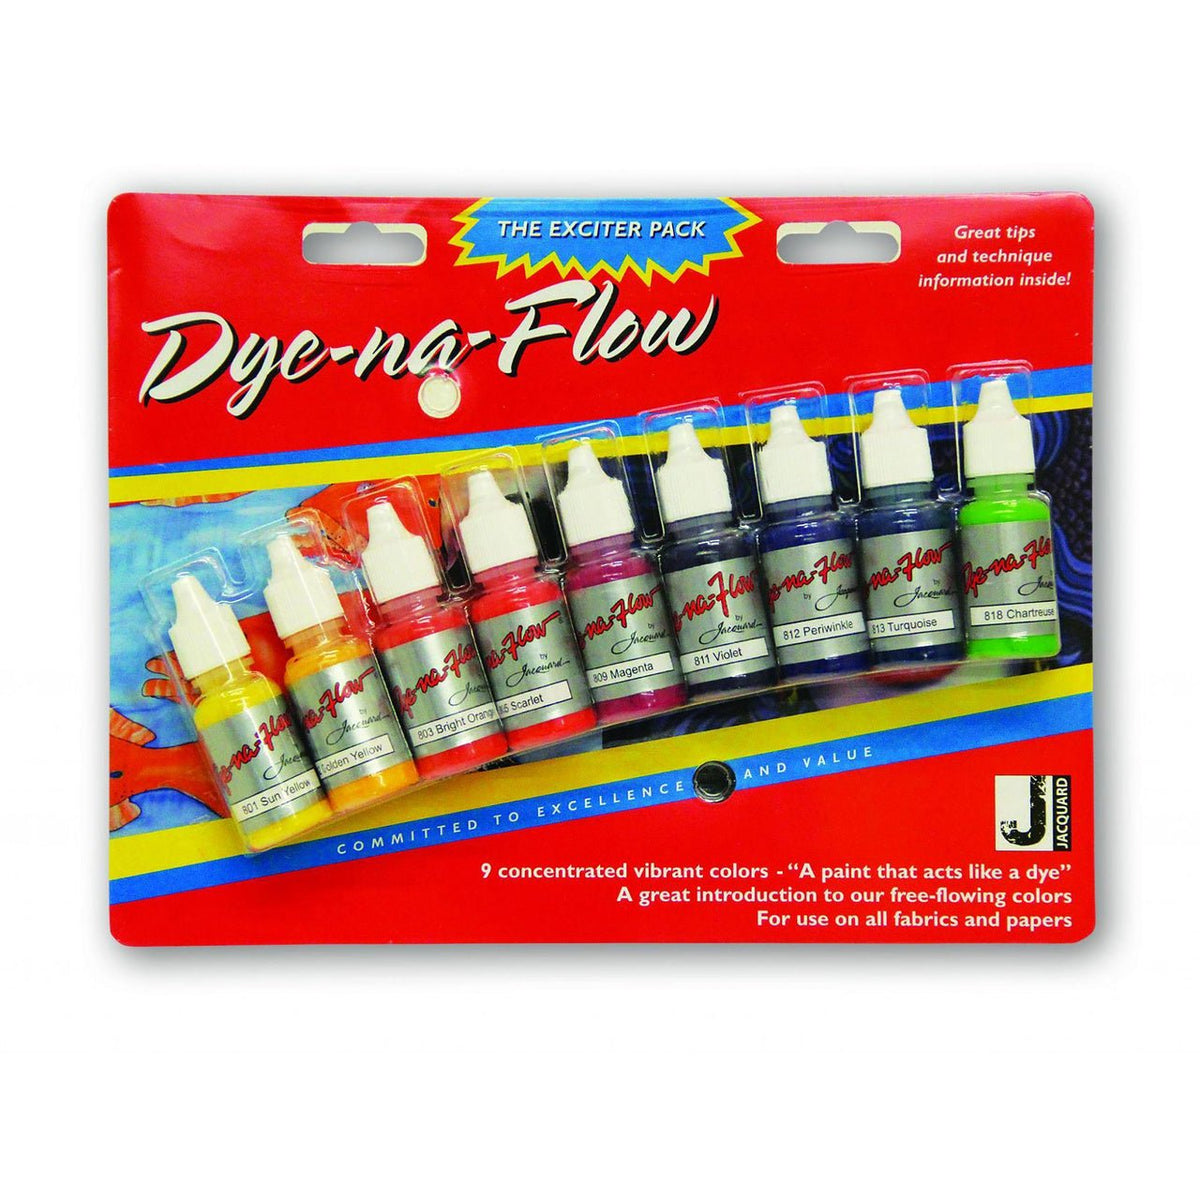 Dye-na-flow exciter pack - merriartist.com